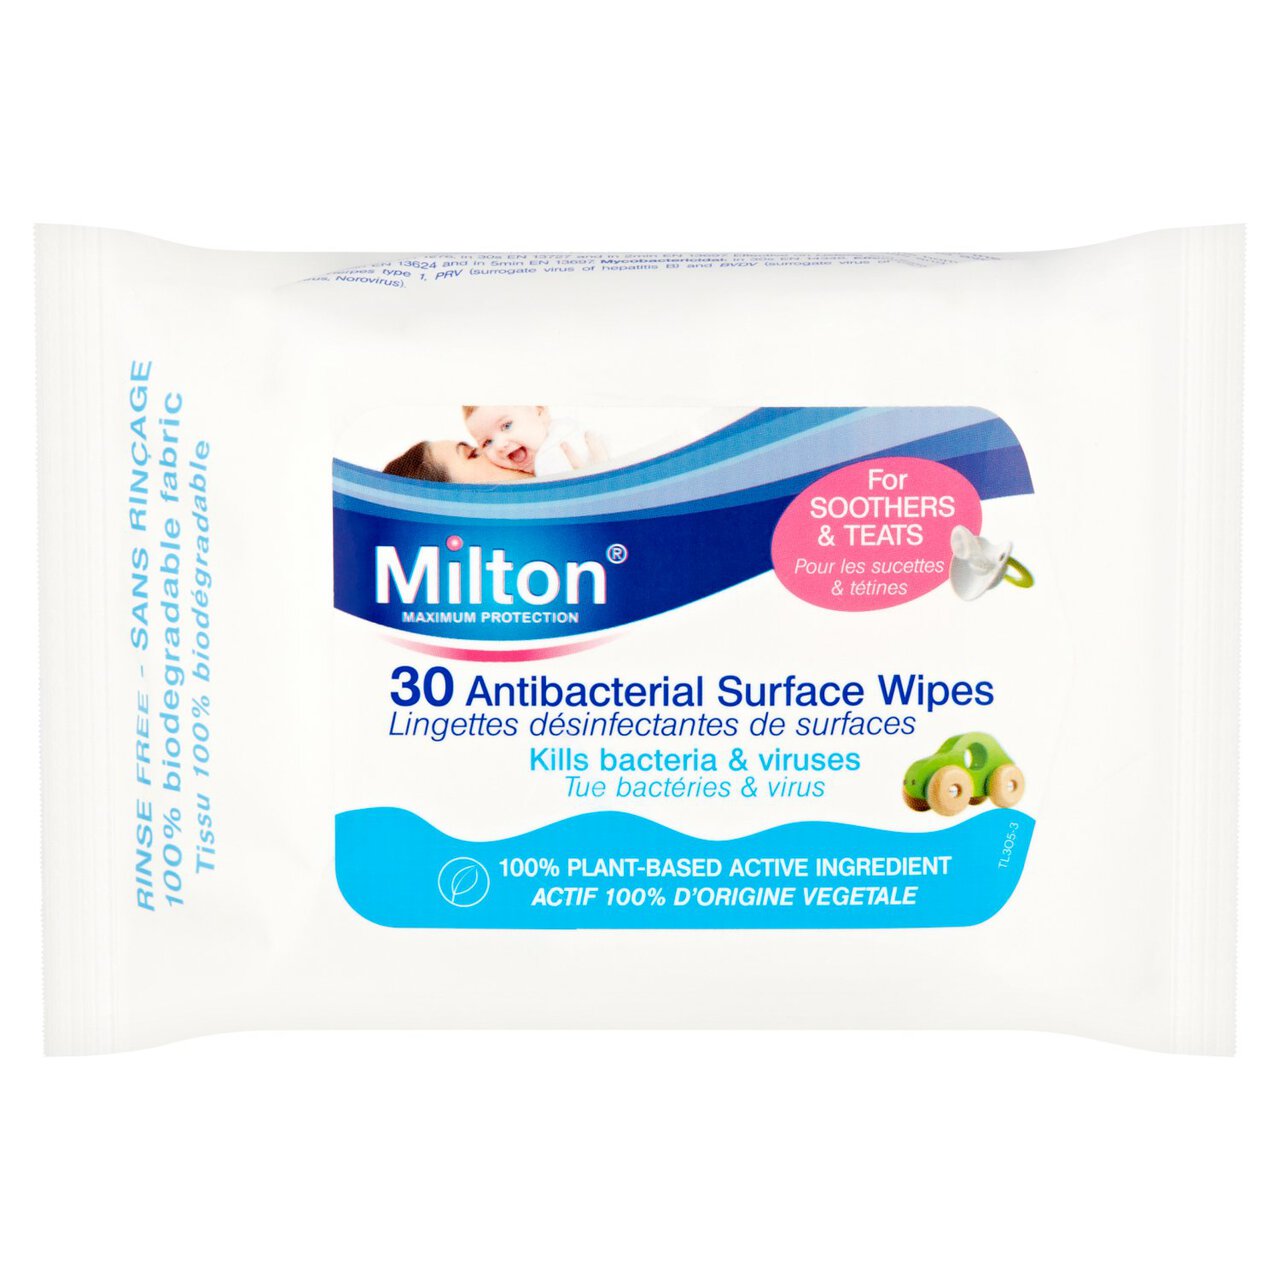 Milton Biodegradable Anti-Bacterial Surface Wipes 30 per pack